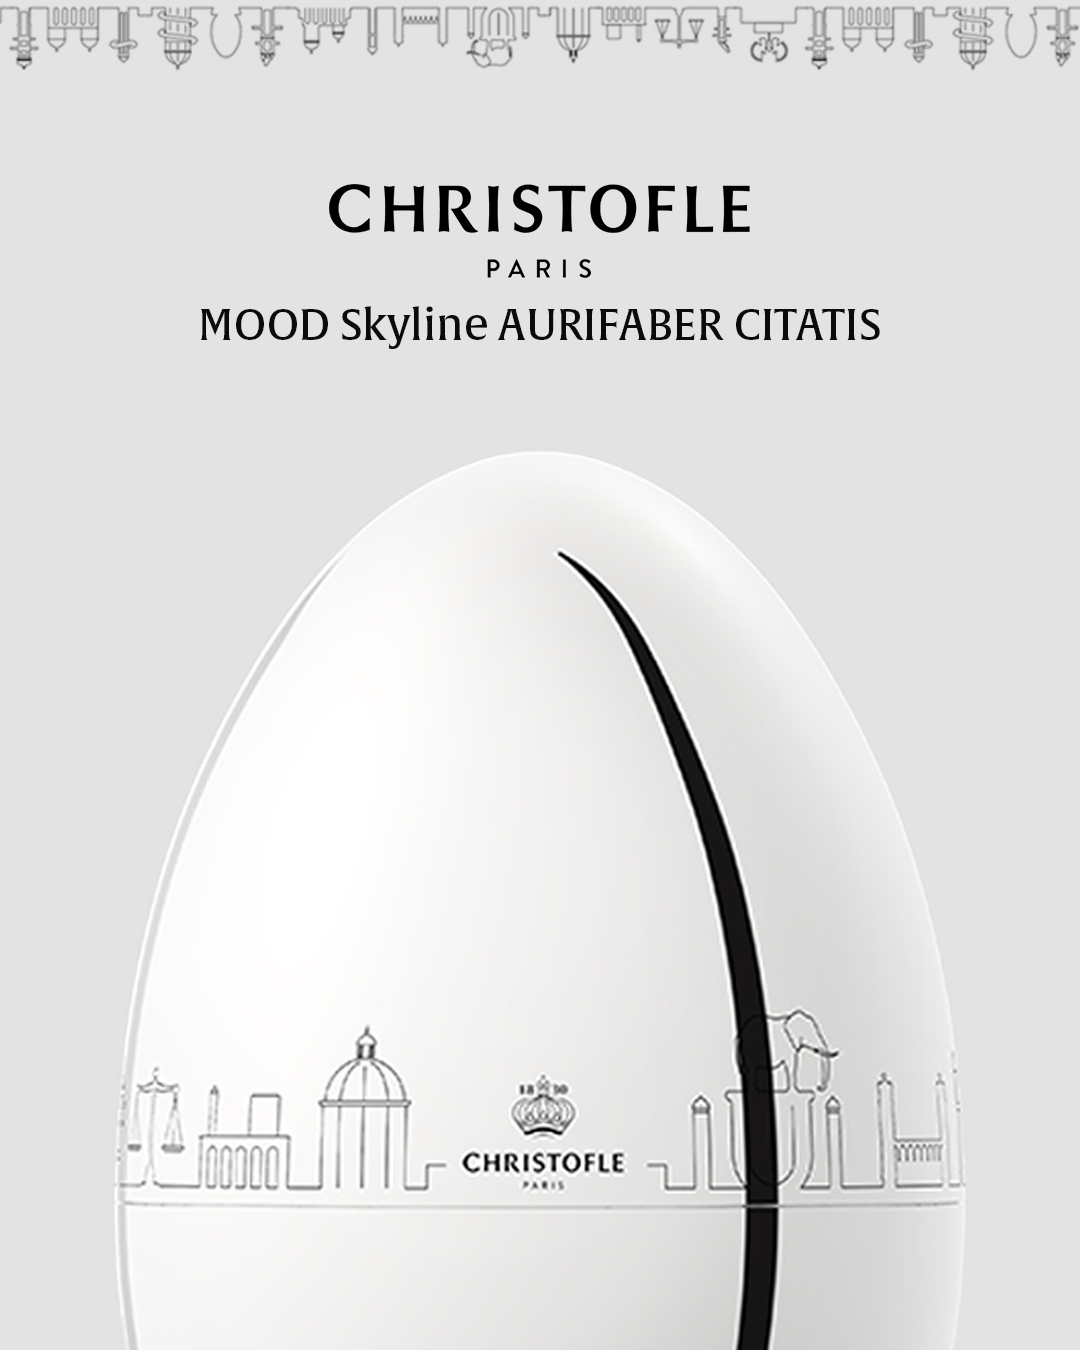 CHRISTOFLE RELEASES A LIMITED-EDITION MOOD SKYLINE AURIFABER CITATIS AVAILABLE EXCLUSIVELY TO 925 GENESIS MOOD NFT OWNERS